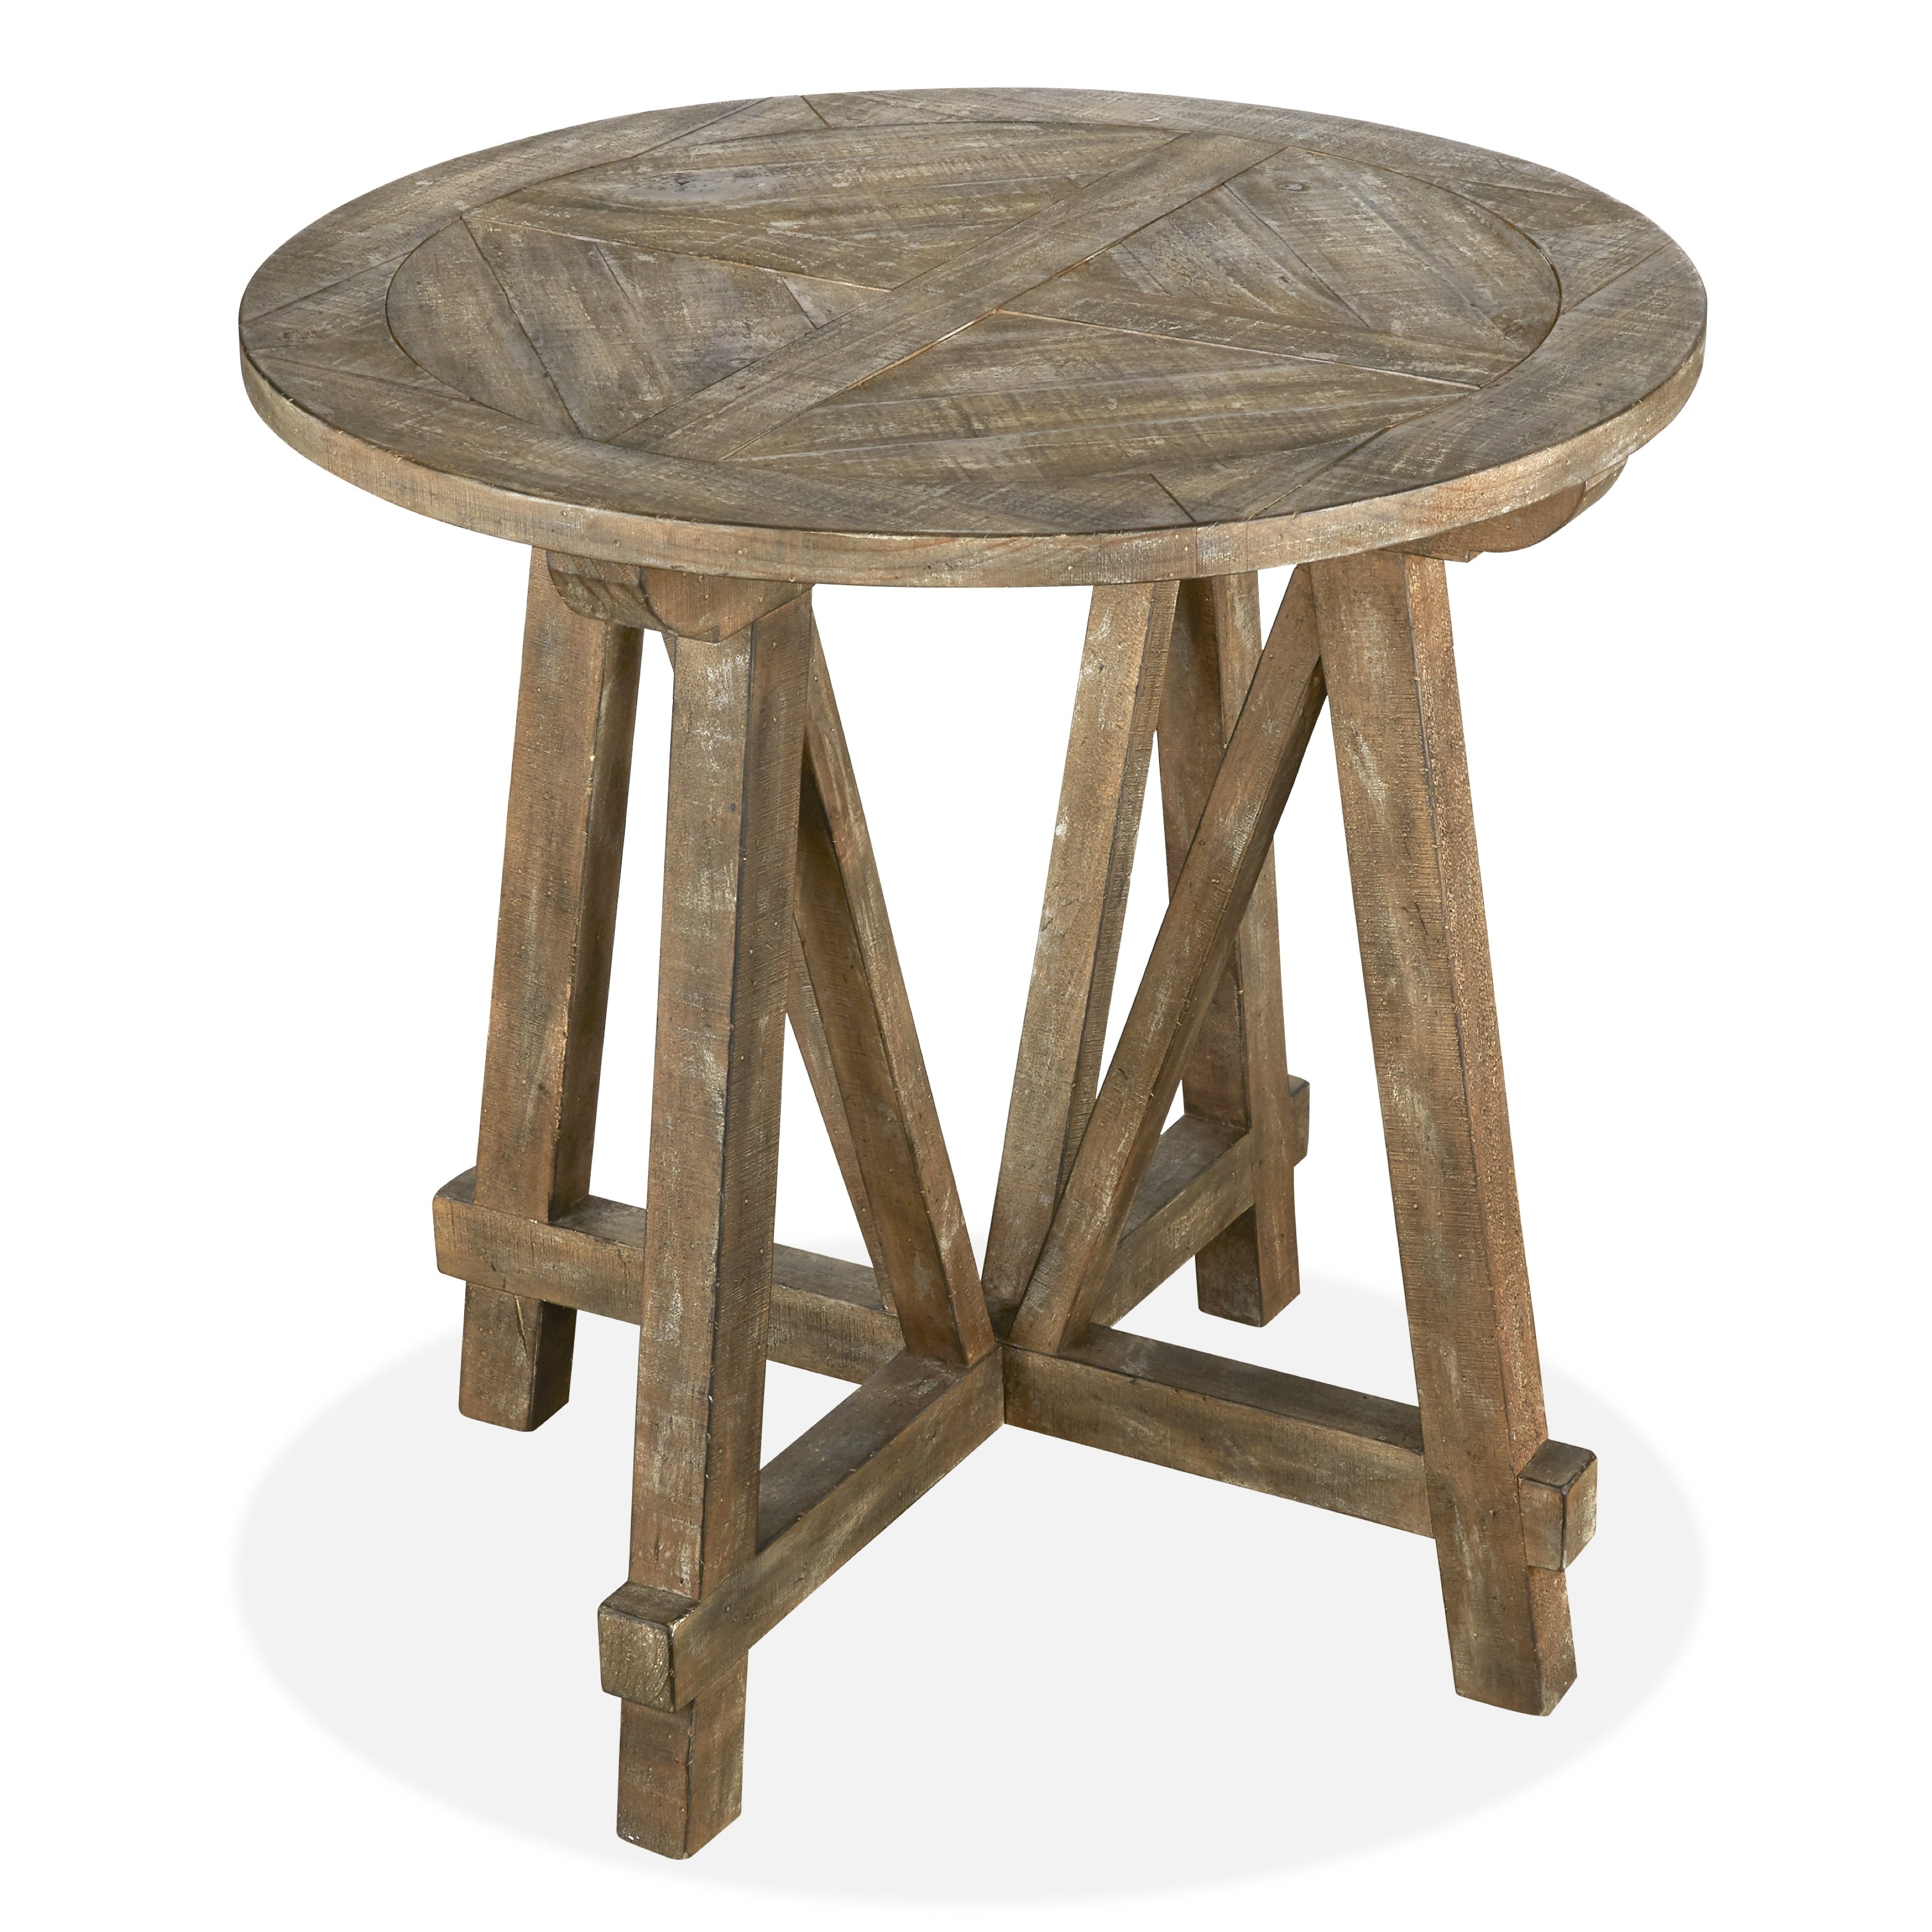 bluff heights rustic weathered nutmeg round accent table wood free shipping today affordable coffee tables corner bench dining ikea tiffany floor lamp clearance white kitchen and